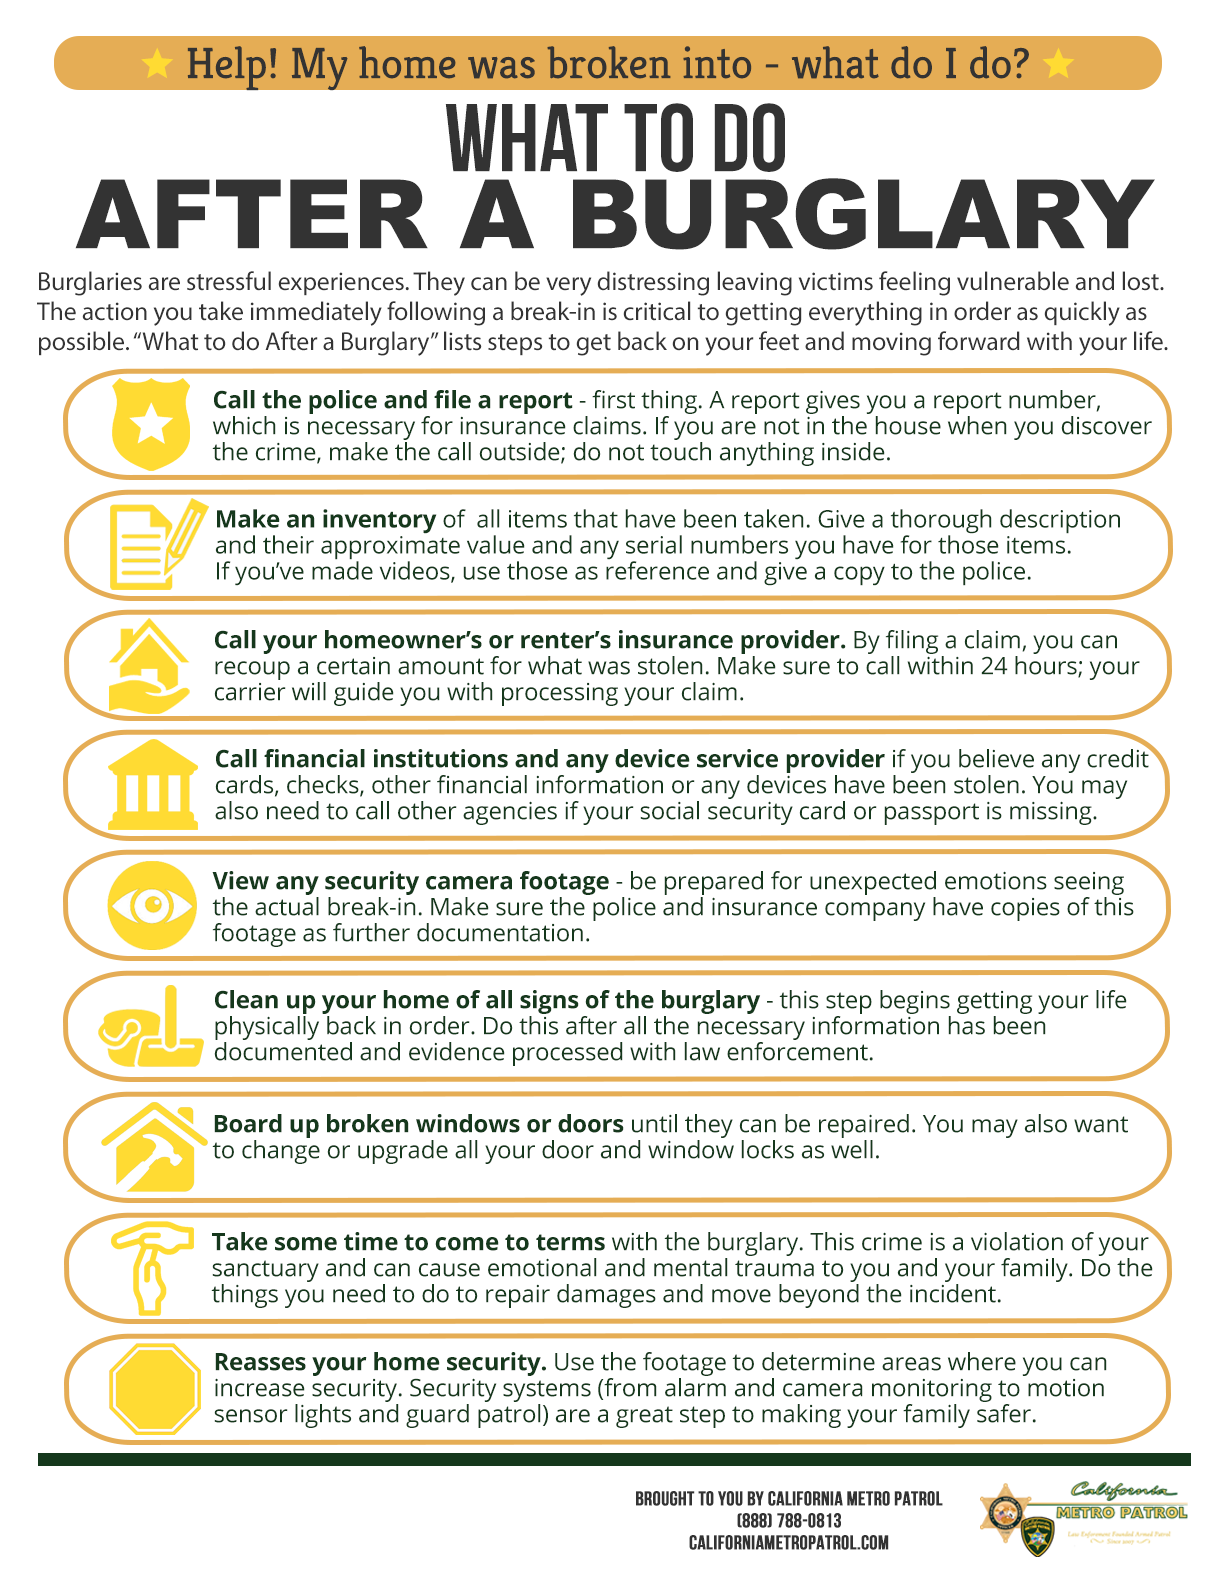 What to Do After a Burglary